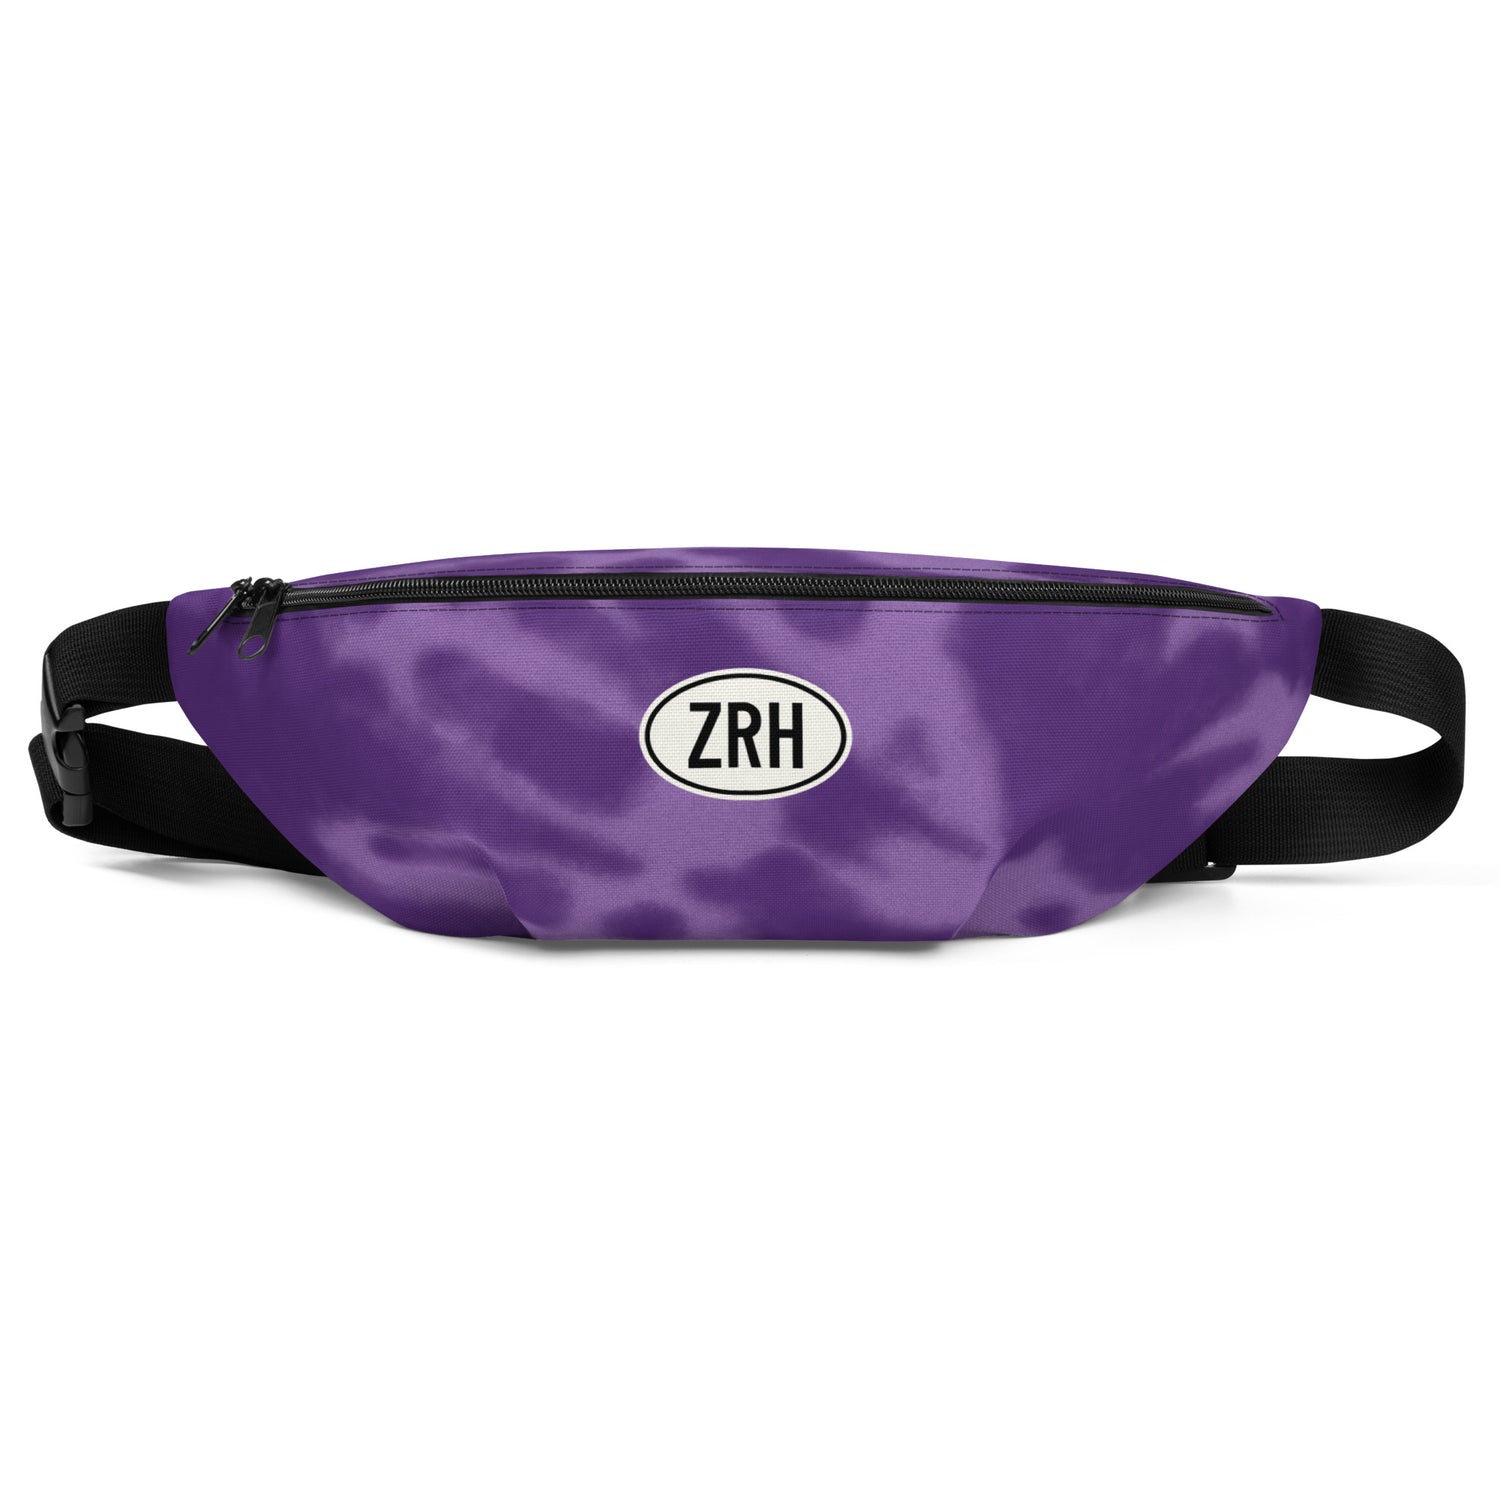 Zurich Switzerland Backpacks, Fanny Packs and Tote Bags • ZRH Airport Code